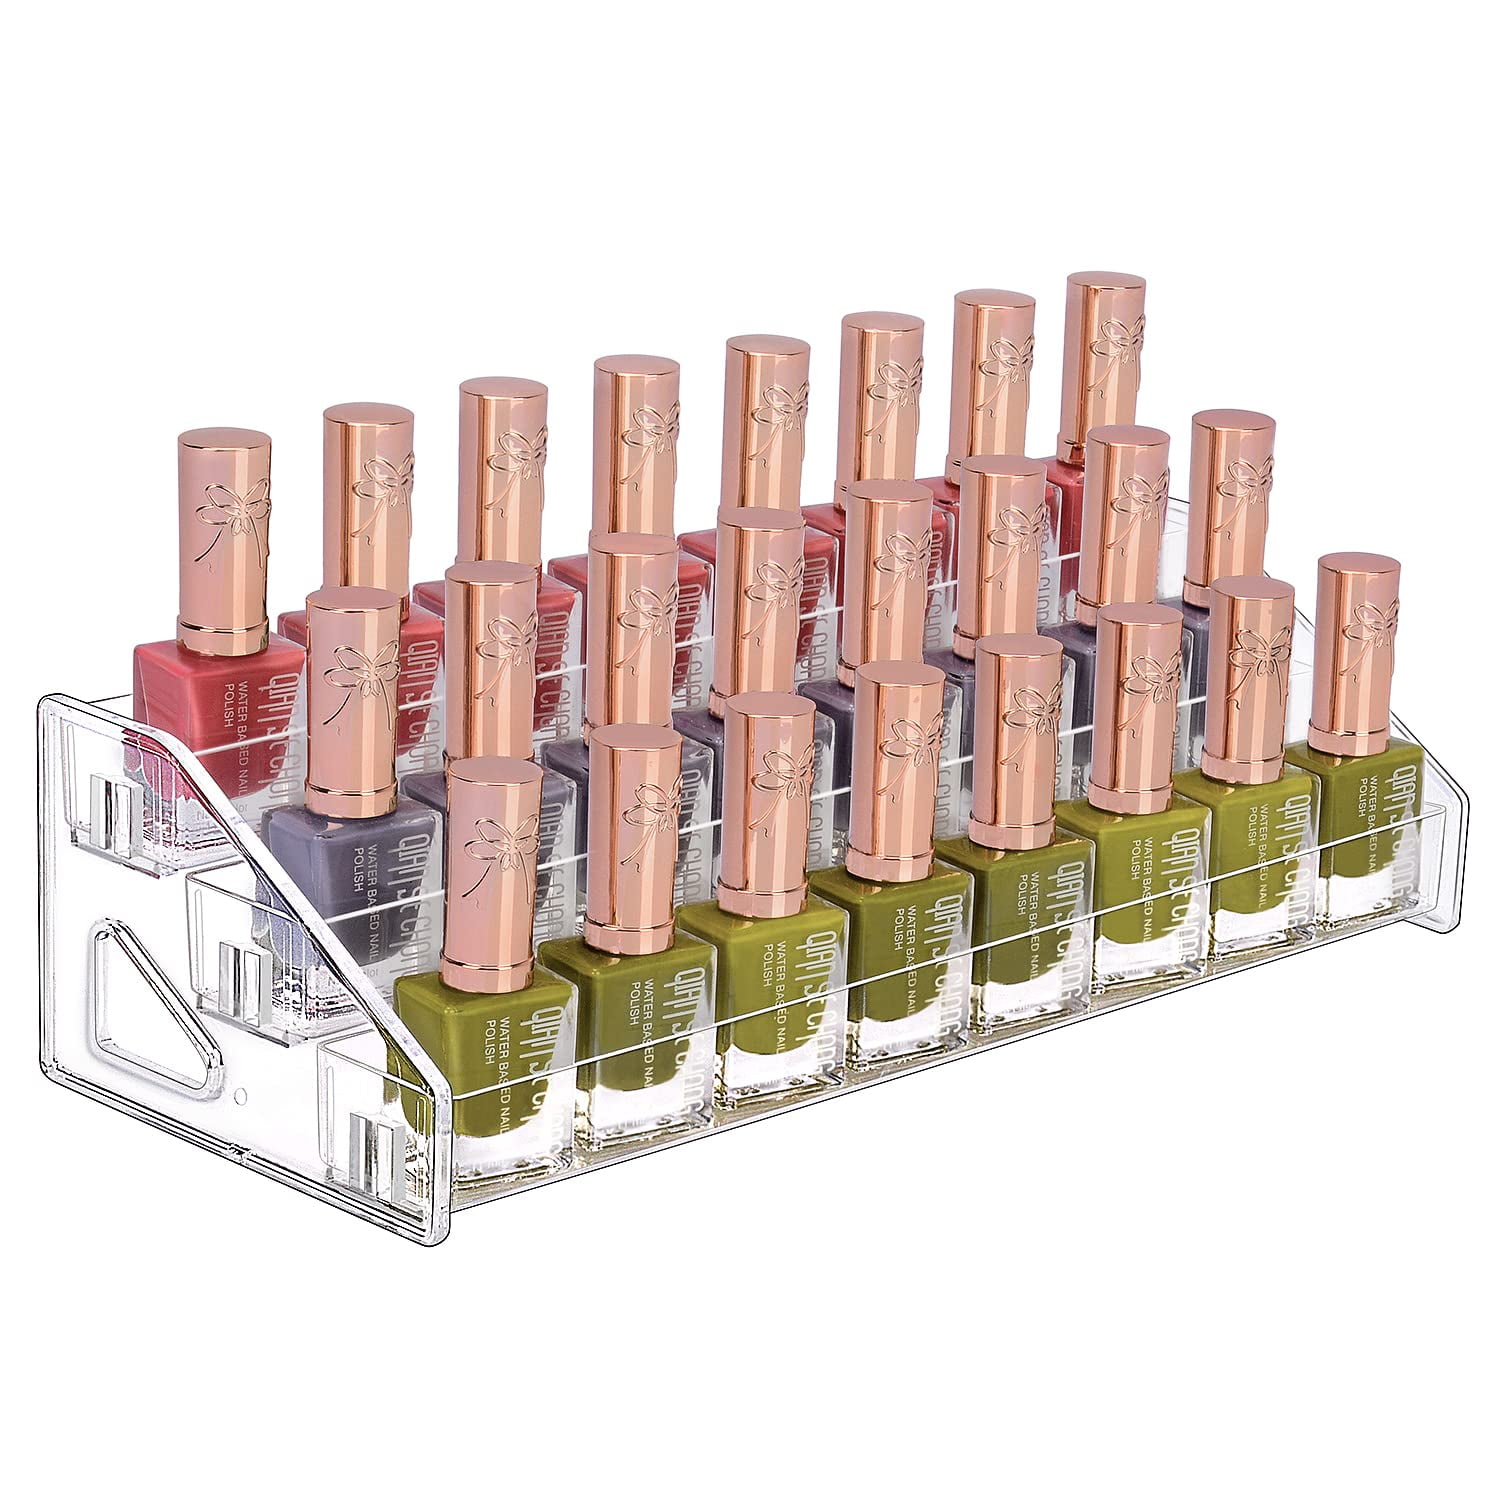 Acrylic Nail Polish Tabletop Display Organizer - health and beauty - by  owner - household sale - craigslist